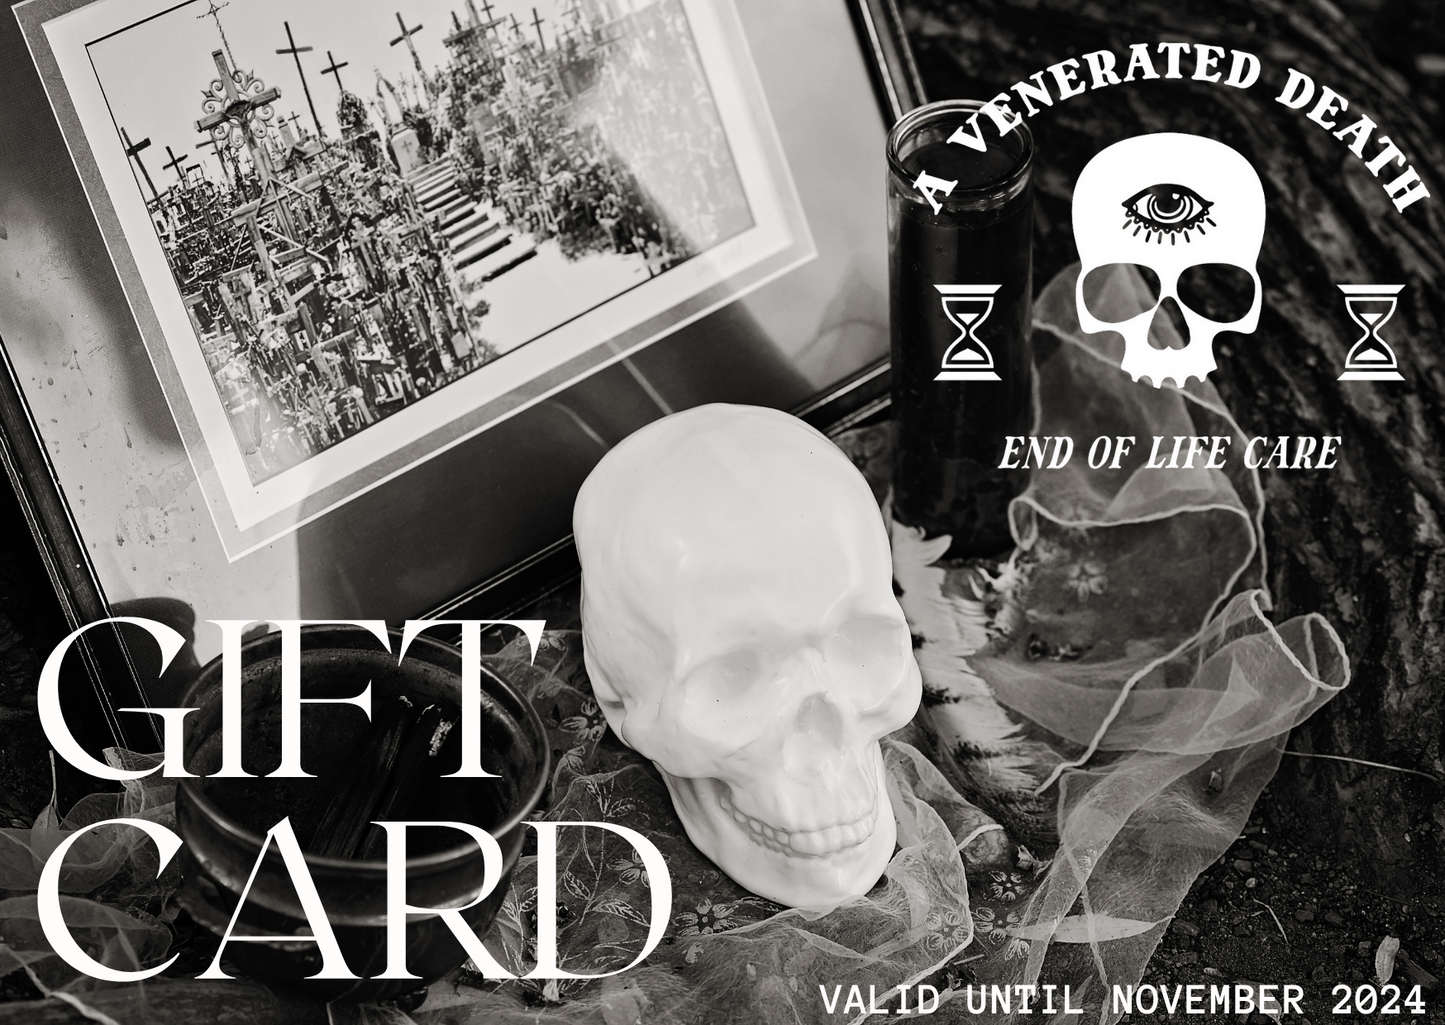 A Venerated Death Goods Gift Card